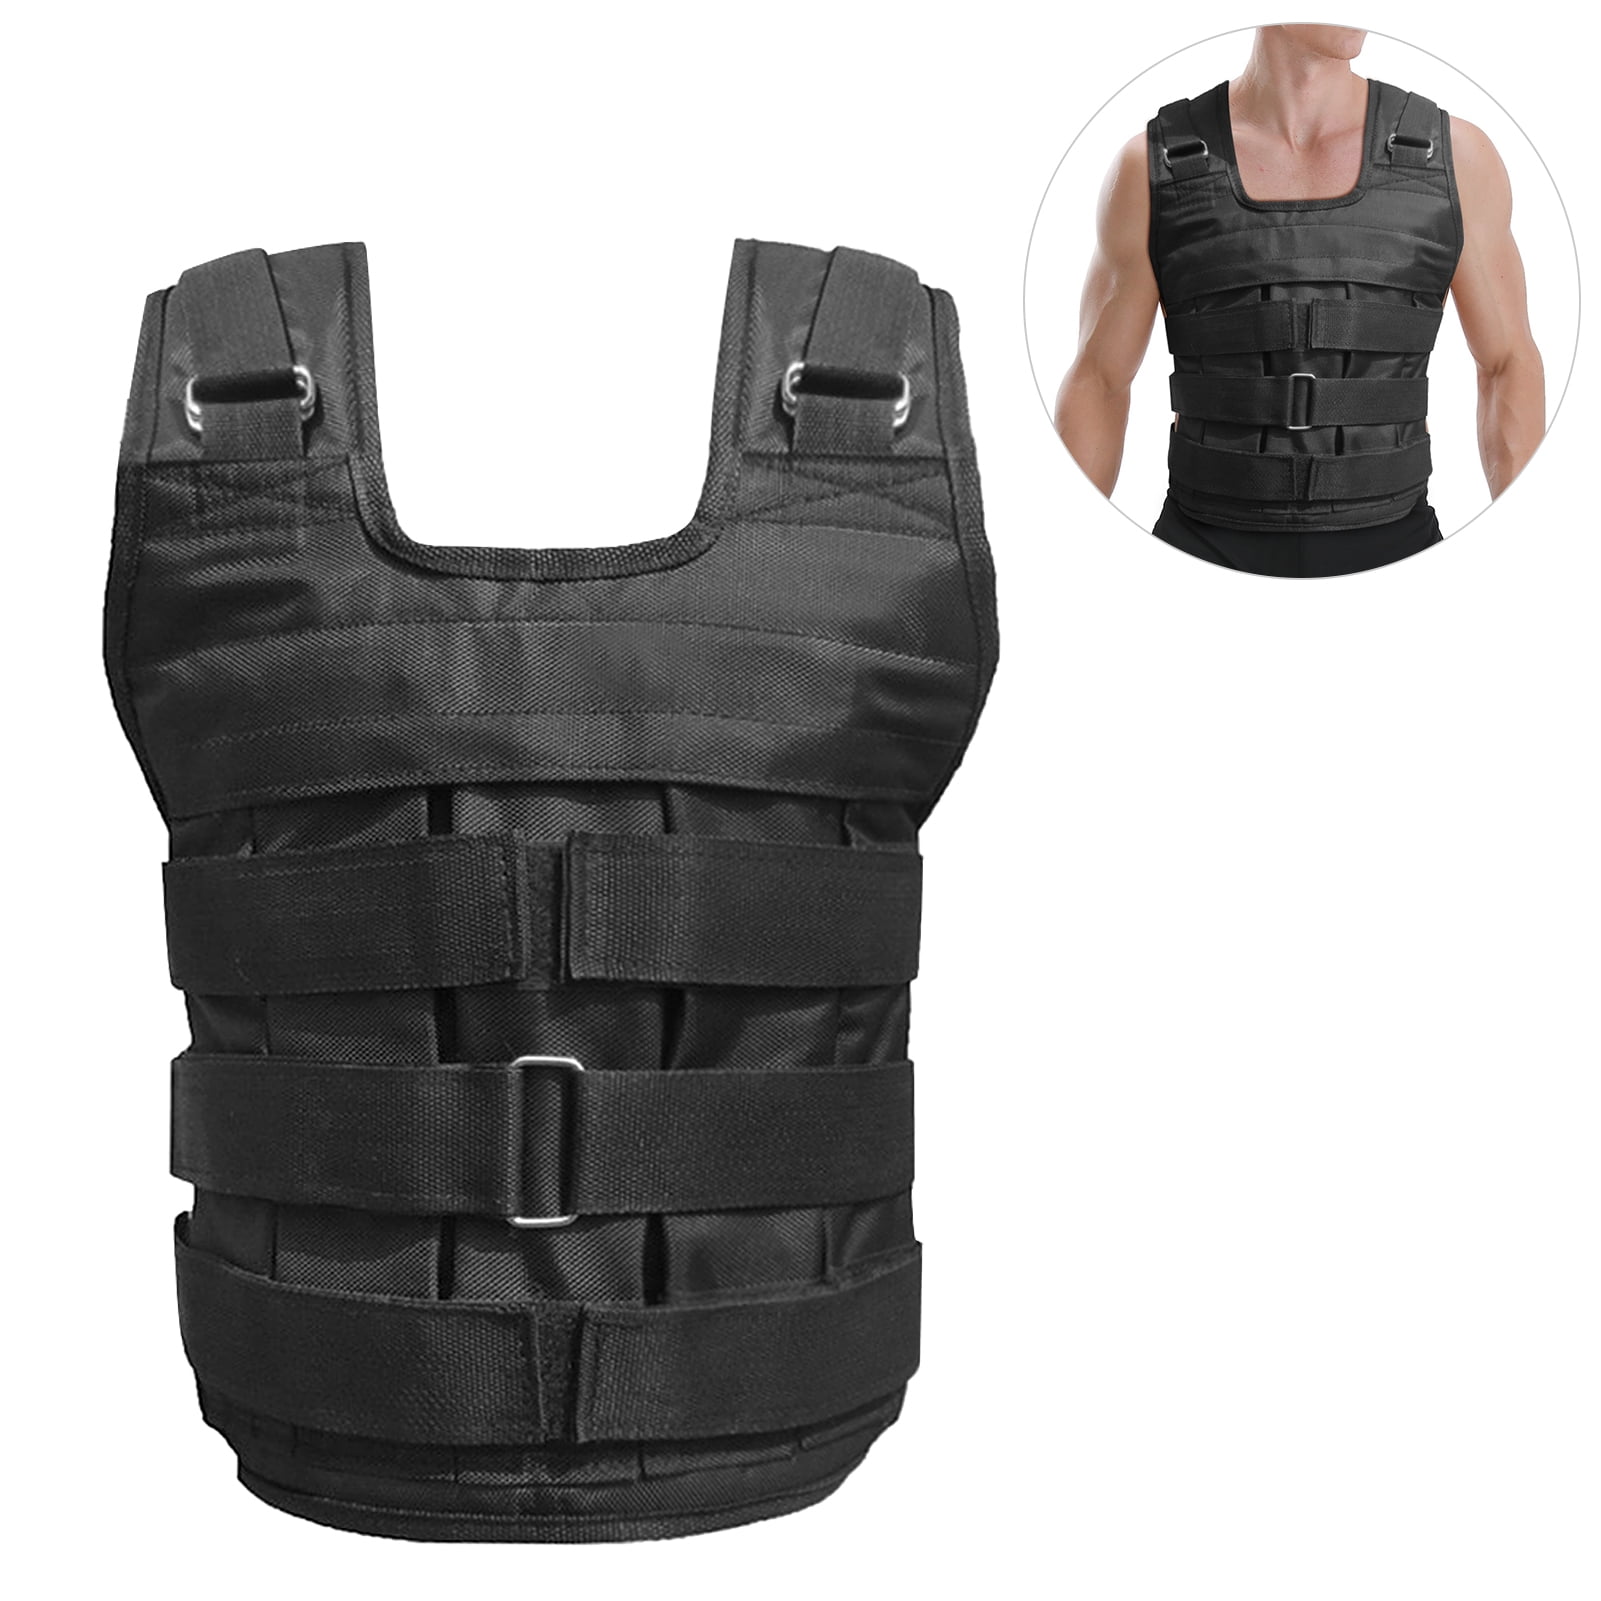 Durable Loading Weighted Vest Adjustable Weight Training Sport Fitness Waistcoat 